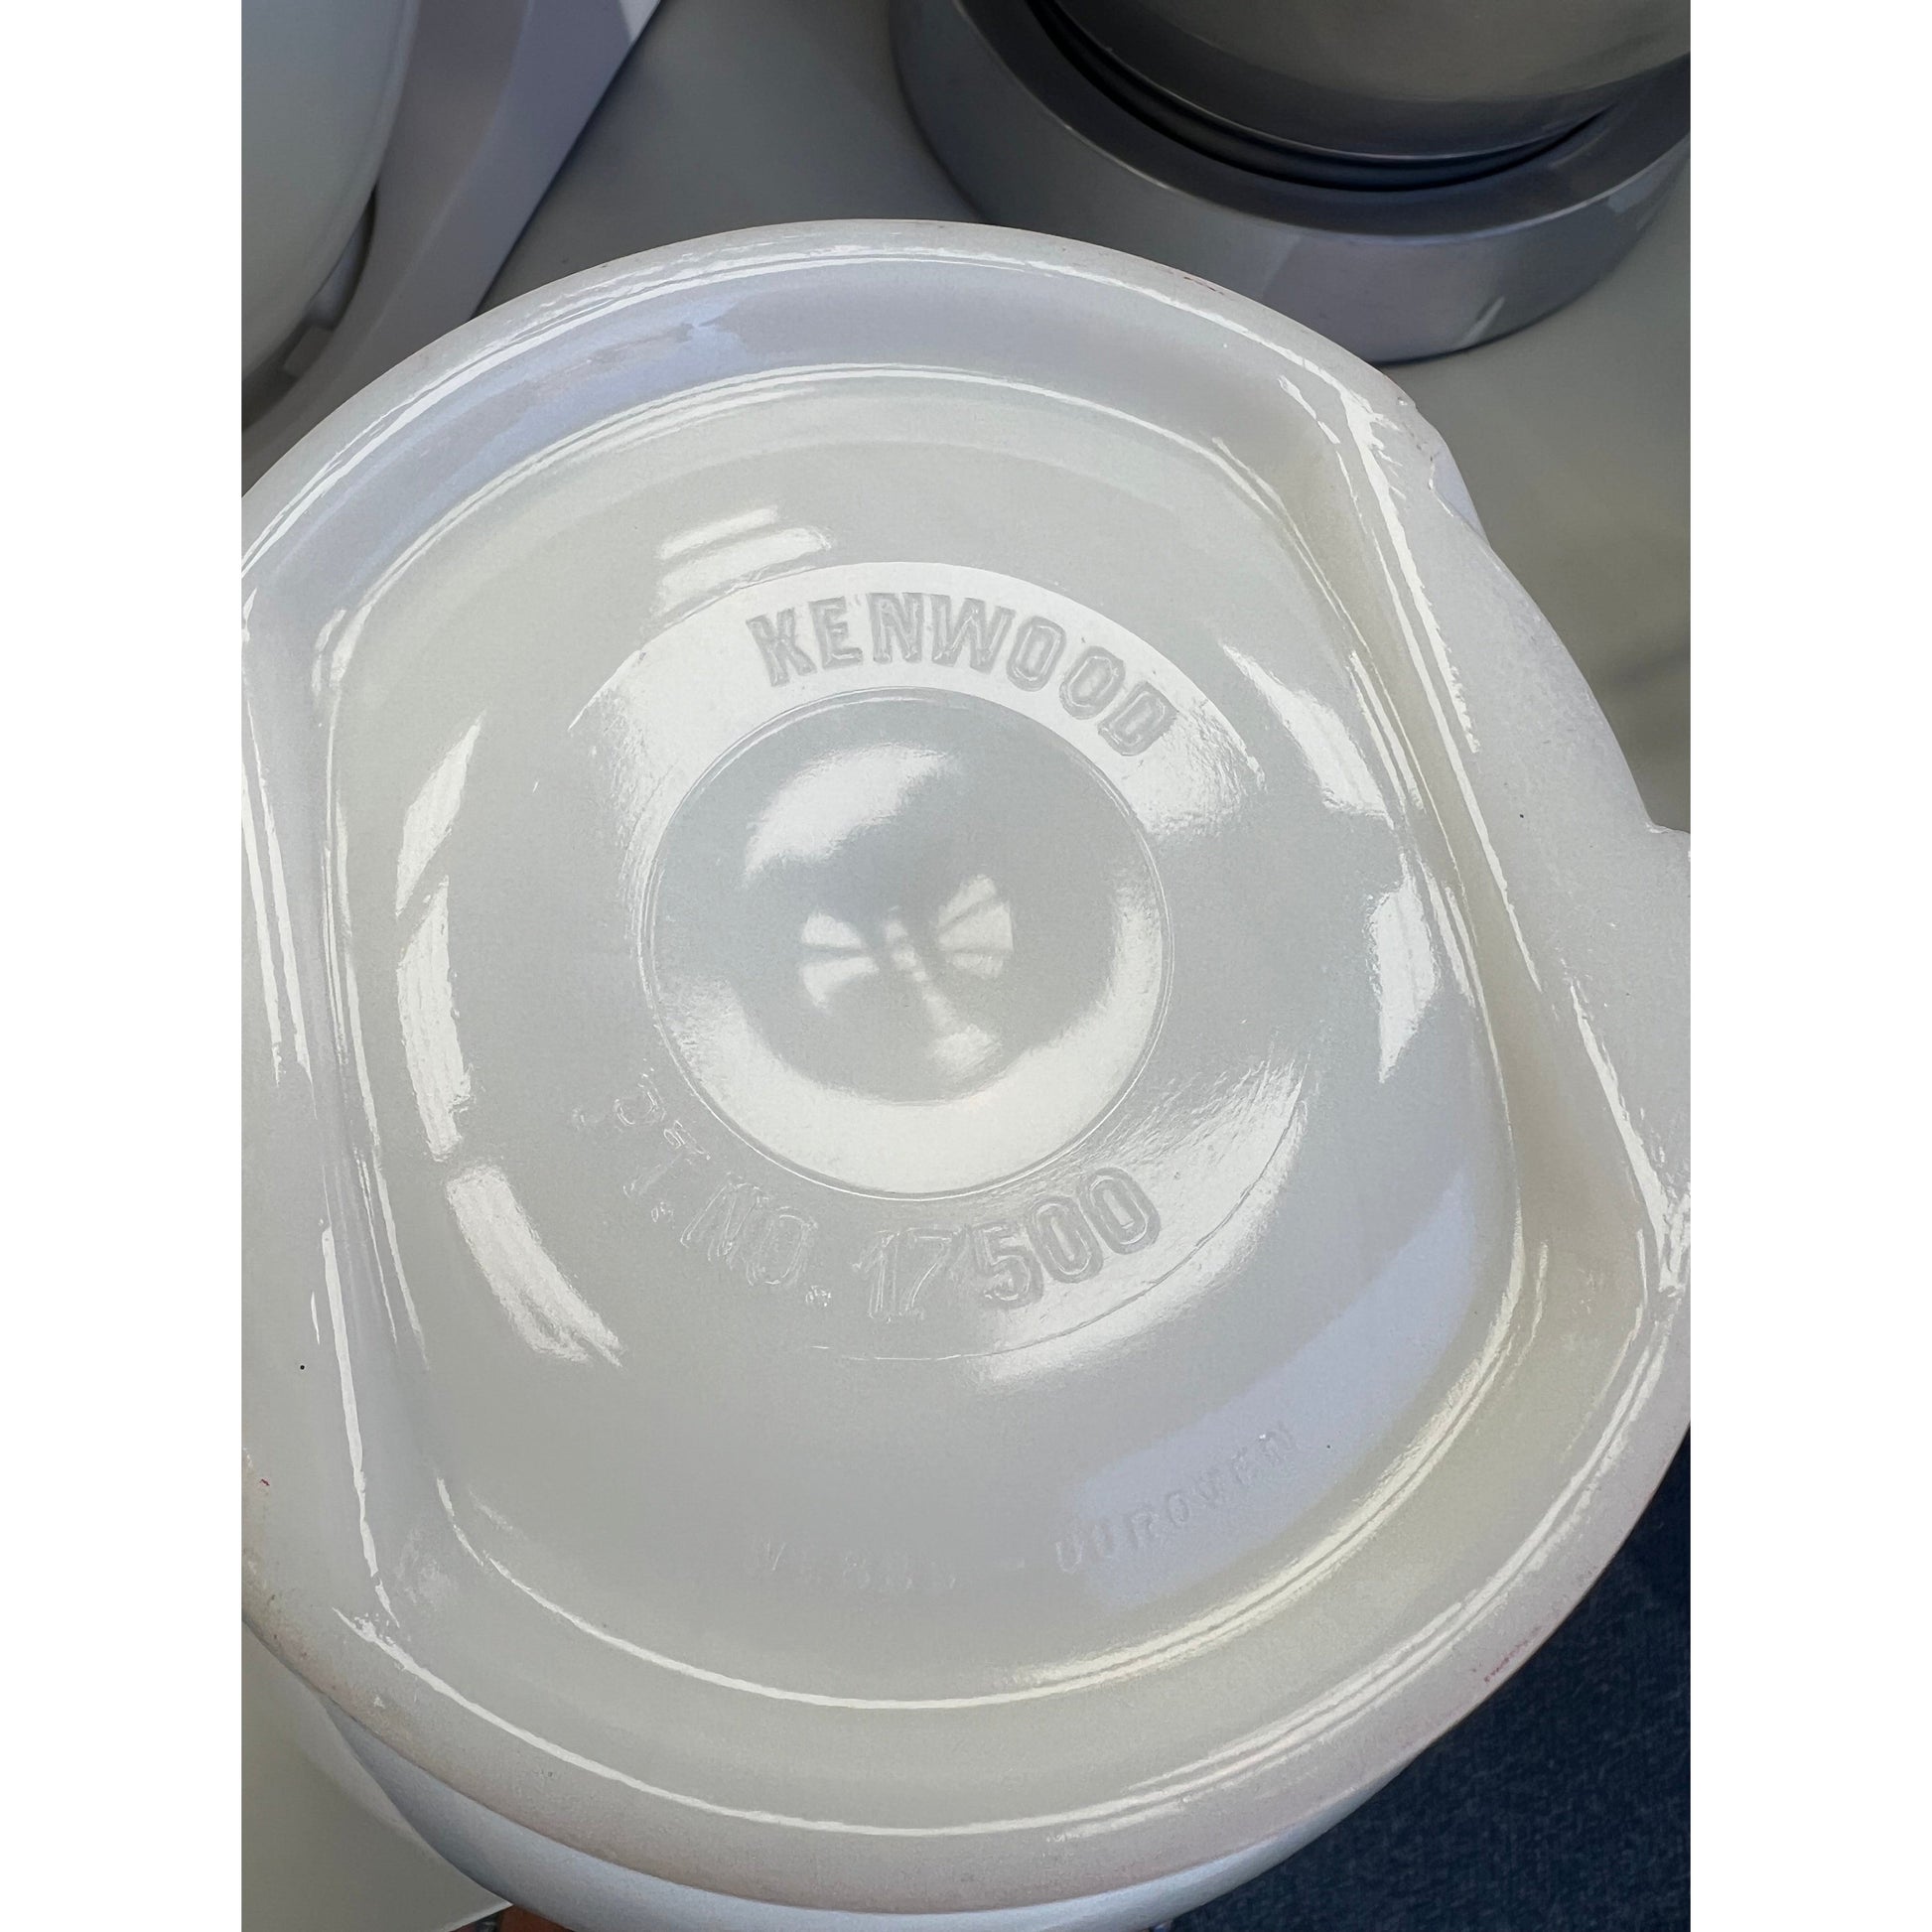 Kenwood Webnbs-bb Duroven Chef bowl for almost all chefs from A701 onwards - Preloved - like new